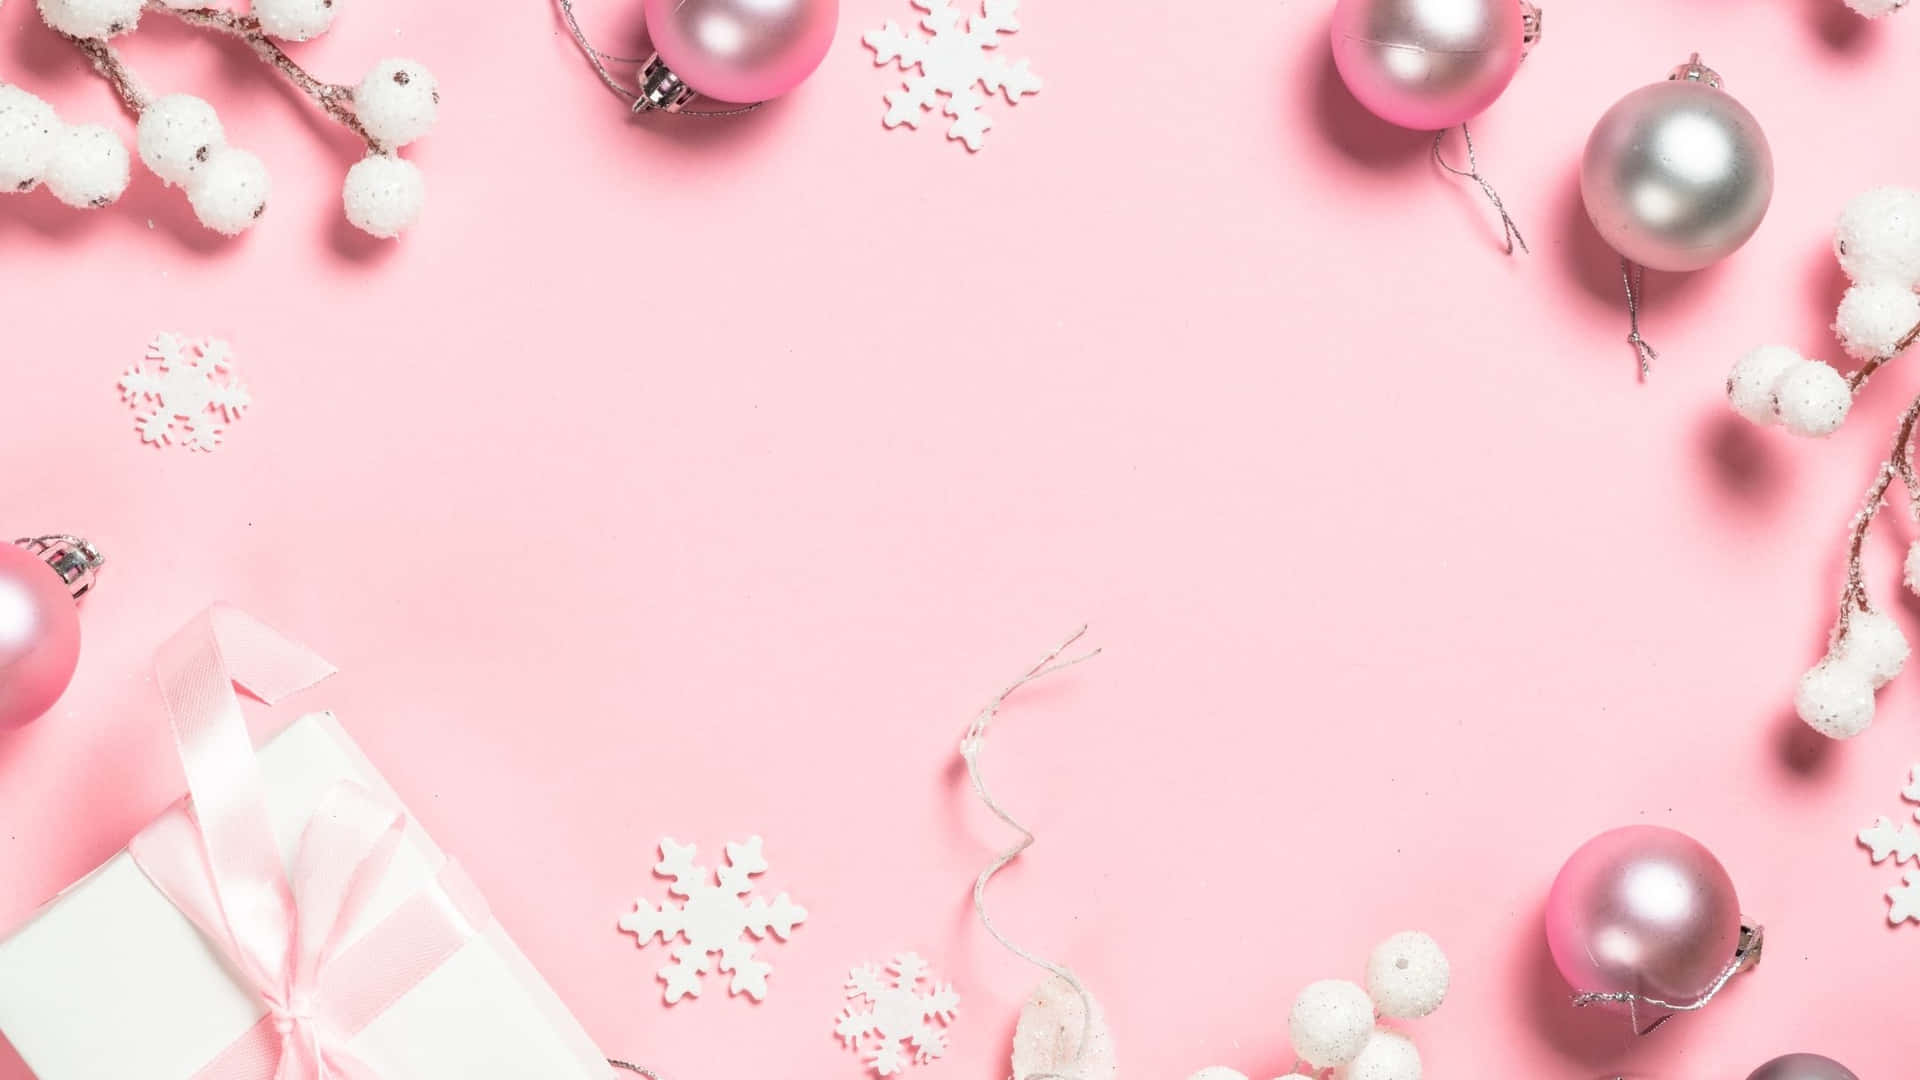 Celebrate and spread cheer with a festive touch of pink at Christmas!